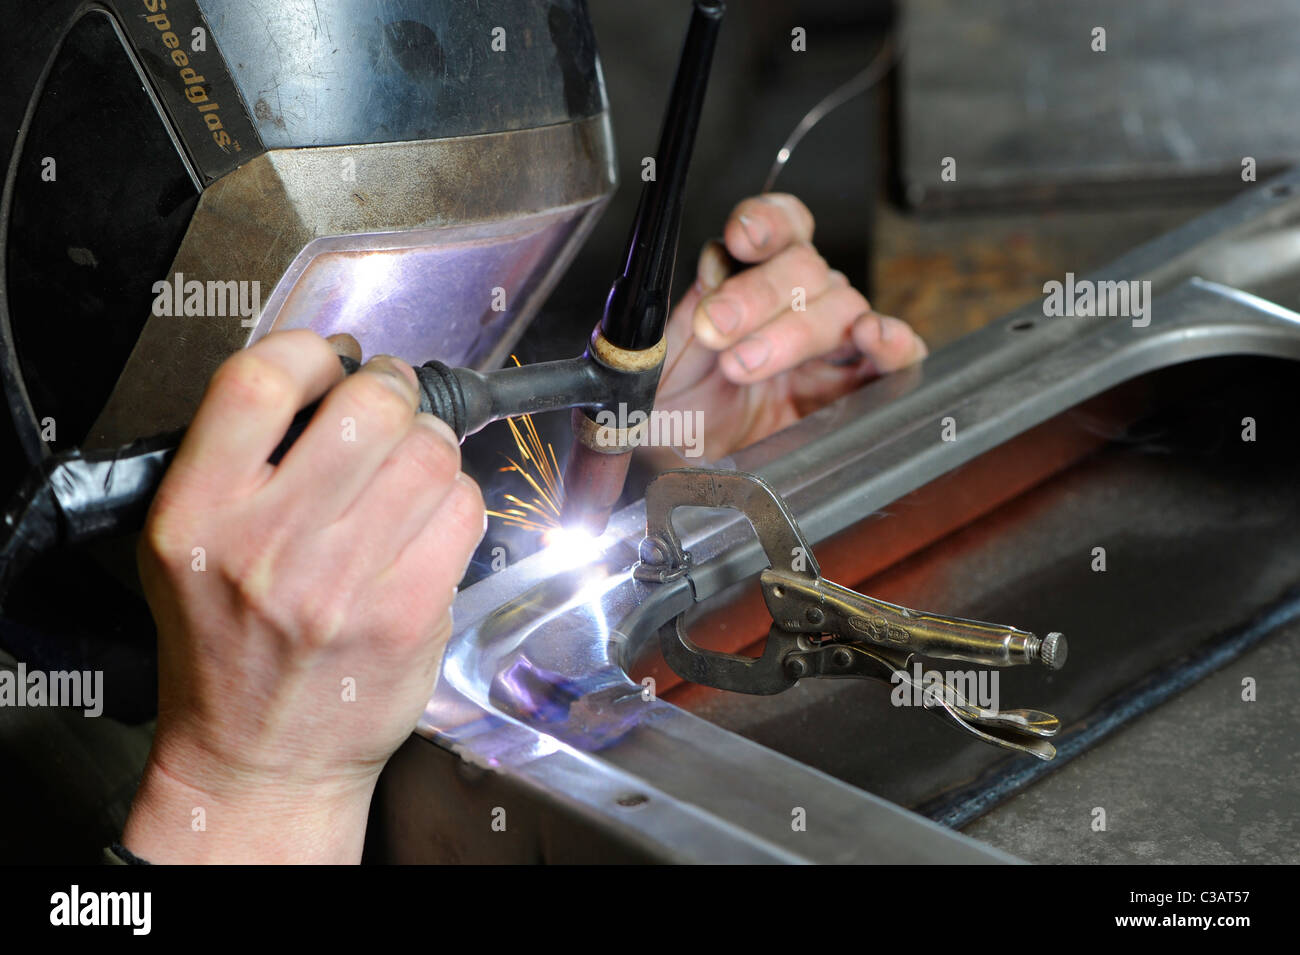 A skilled metal worker at Working Metals, using tig welding method to make a repair on a VW camper door. Stock Photo